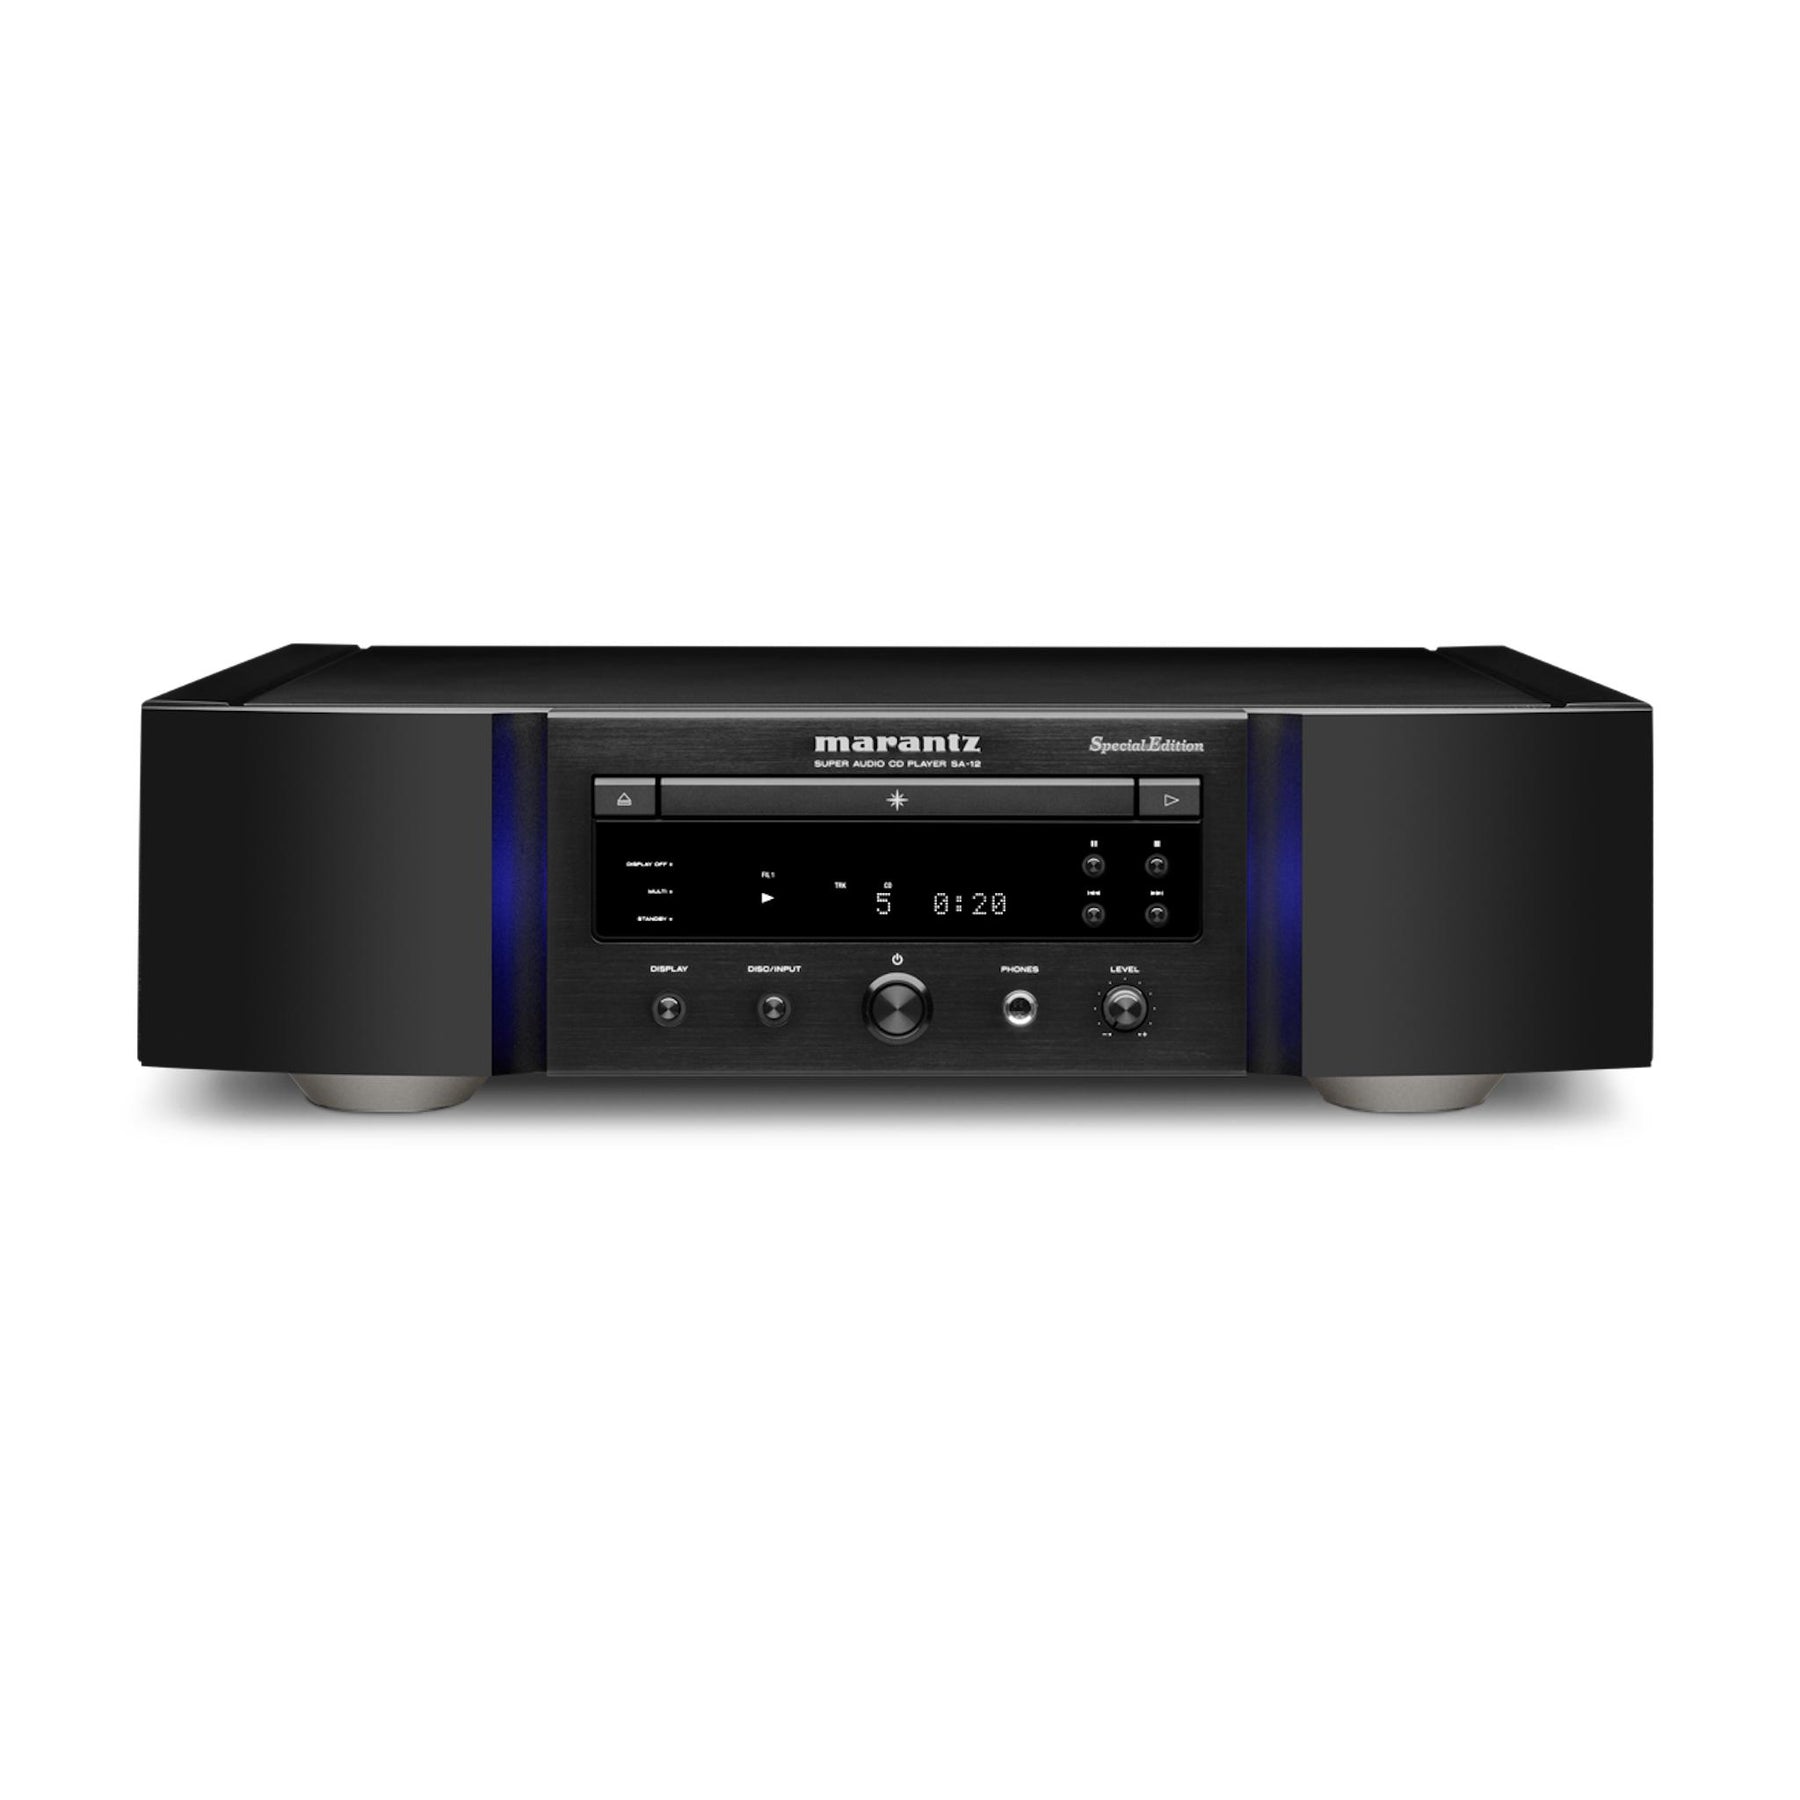 CD6007 CD Player - Finely-Tuned Audio Quality from CD or USB